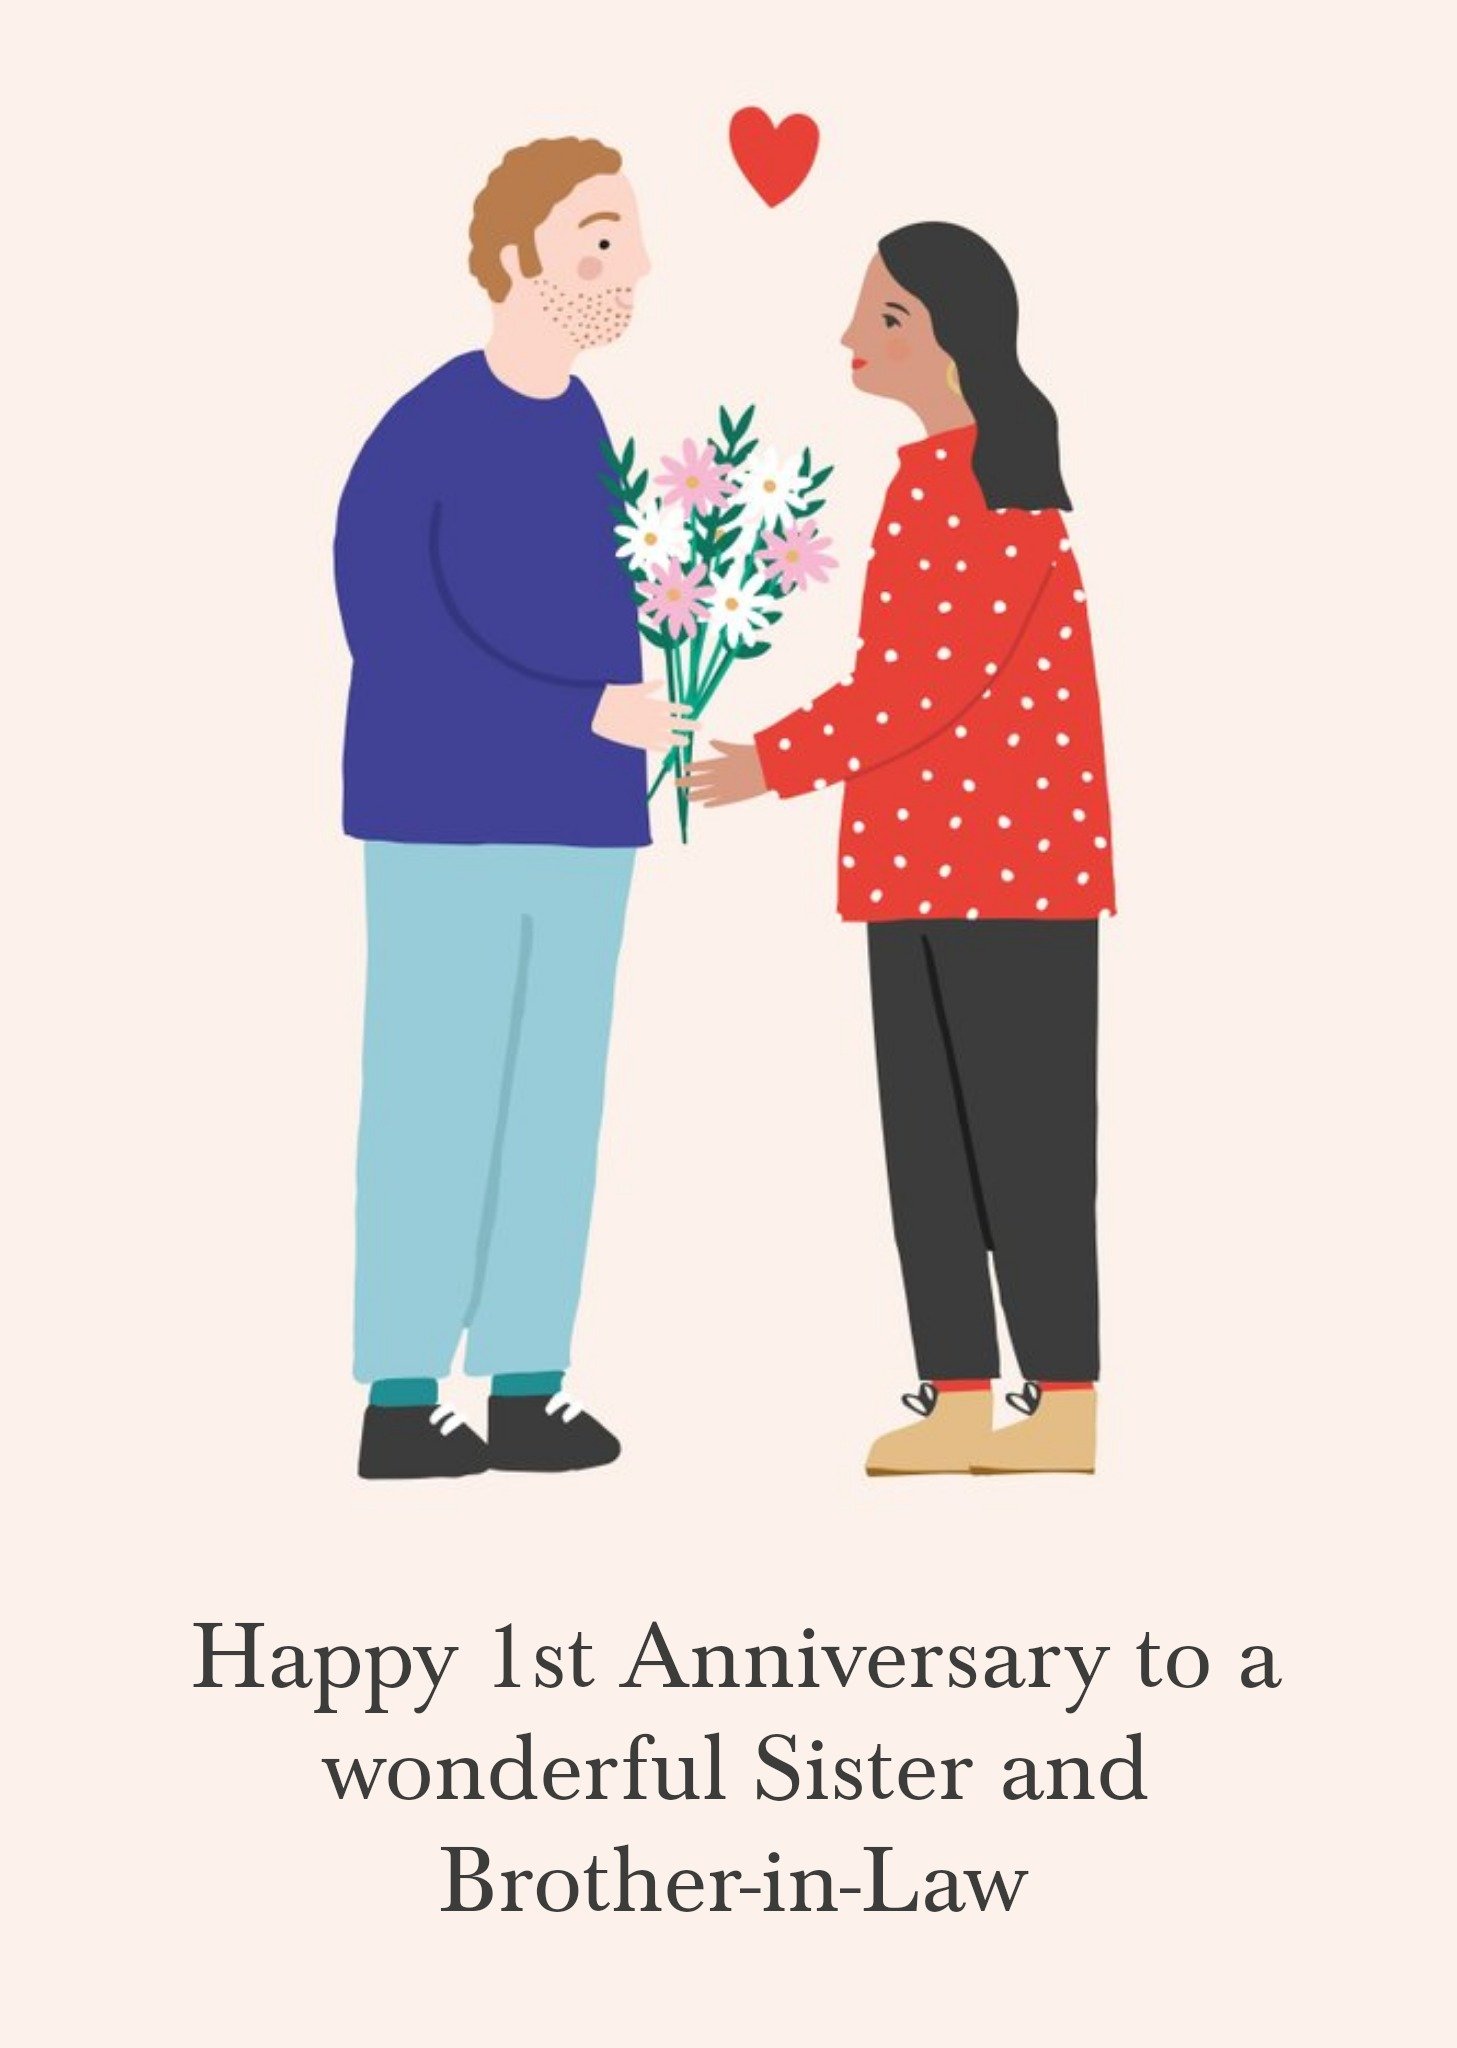 Moonpig Illustration Of A Couple Sharing Flowers Happy First Anniversary Card, Large